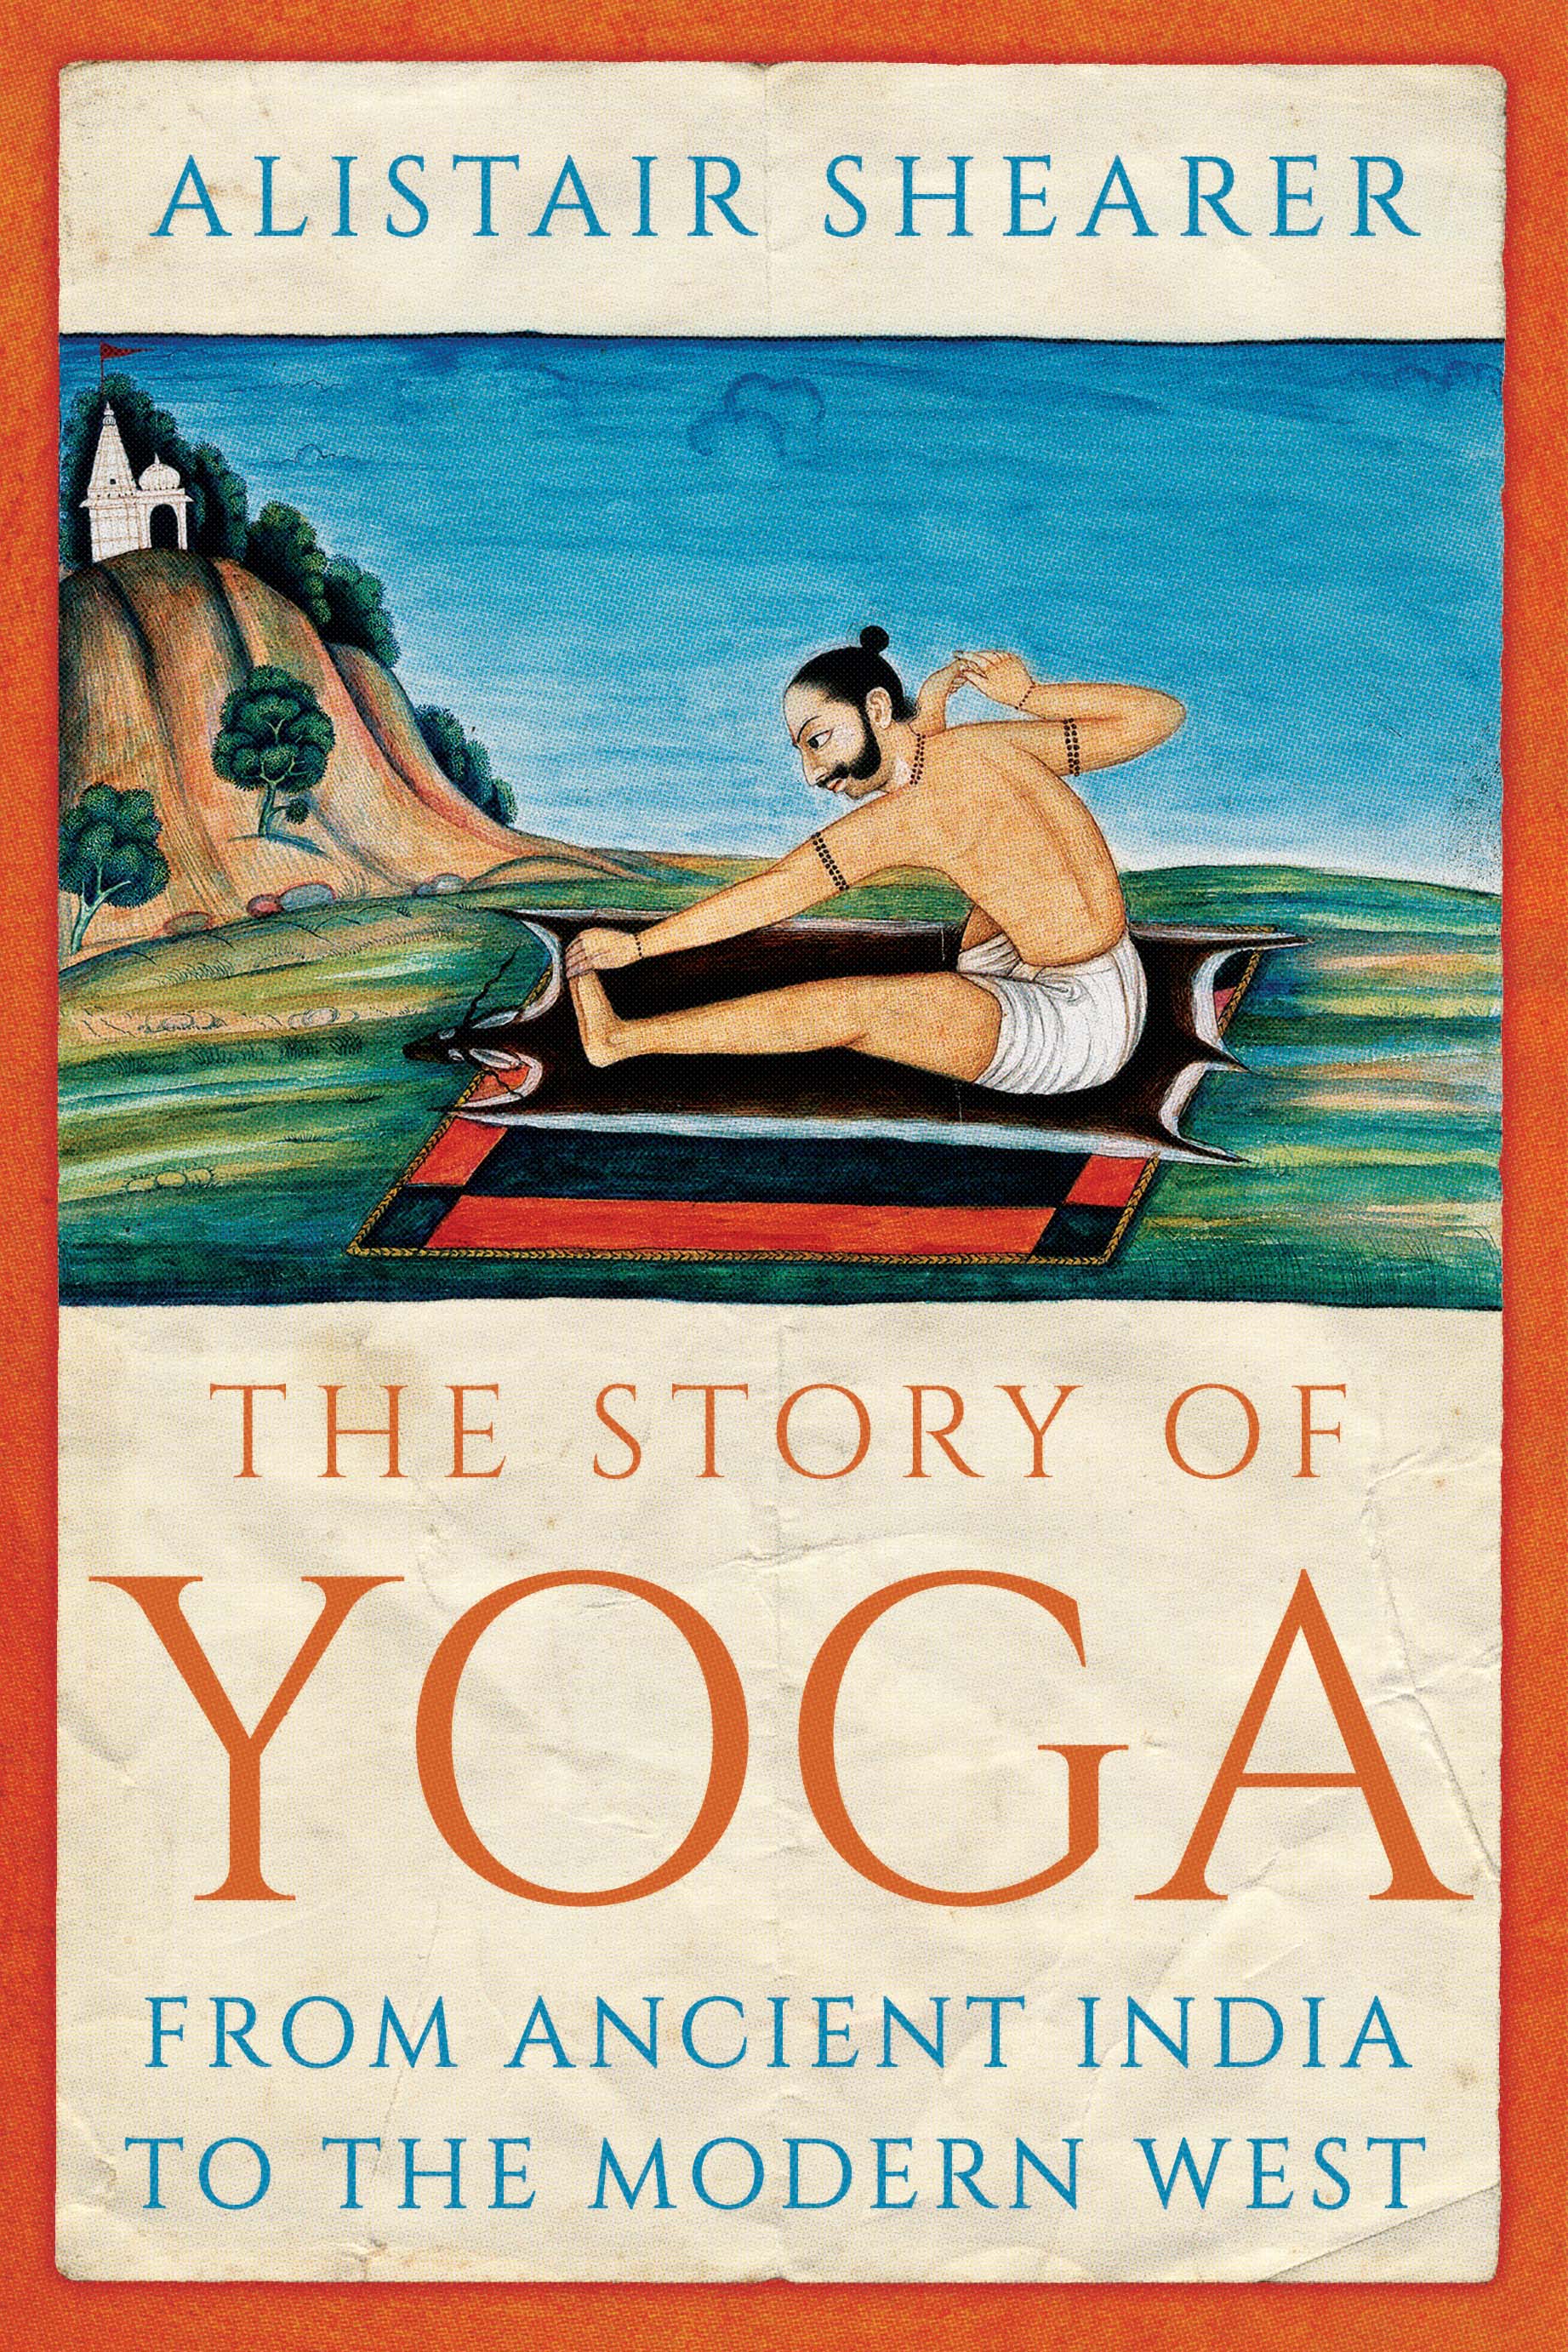 research books on yoga